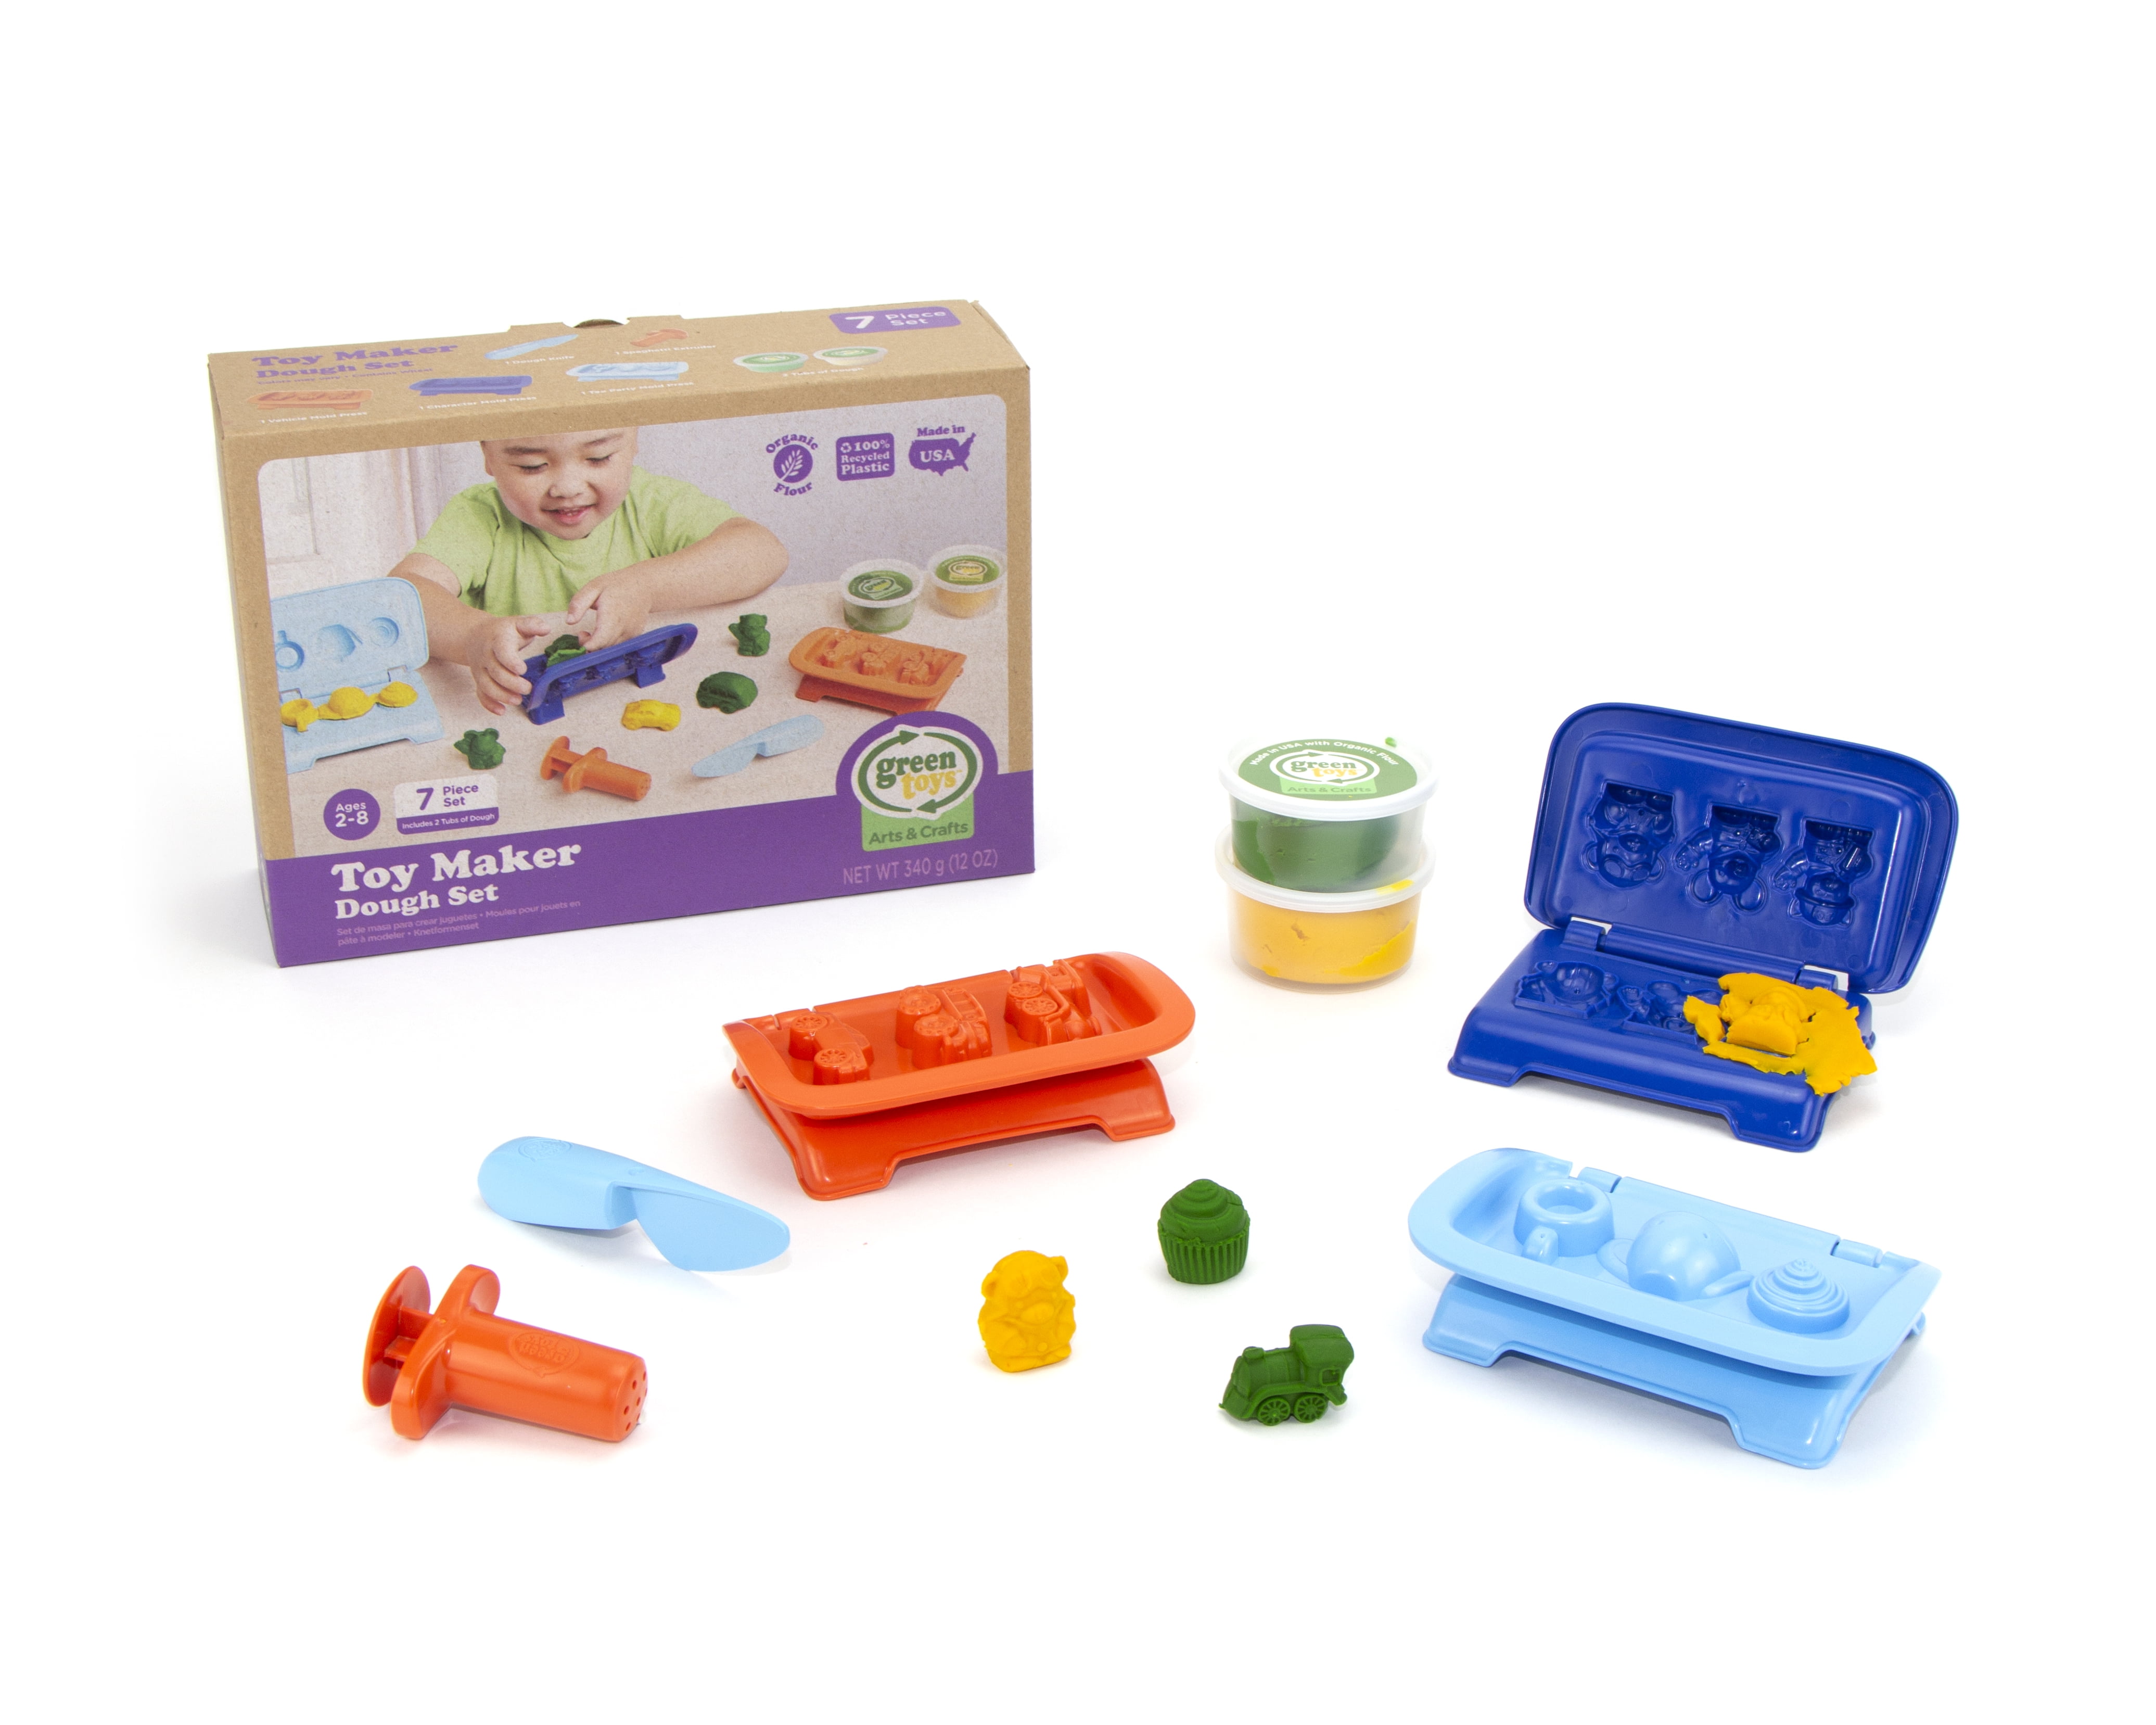 Details about   Clay Dough Tools Kit Play Set Mold Kids Toy Extruder Time Colorful Fun DM 